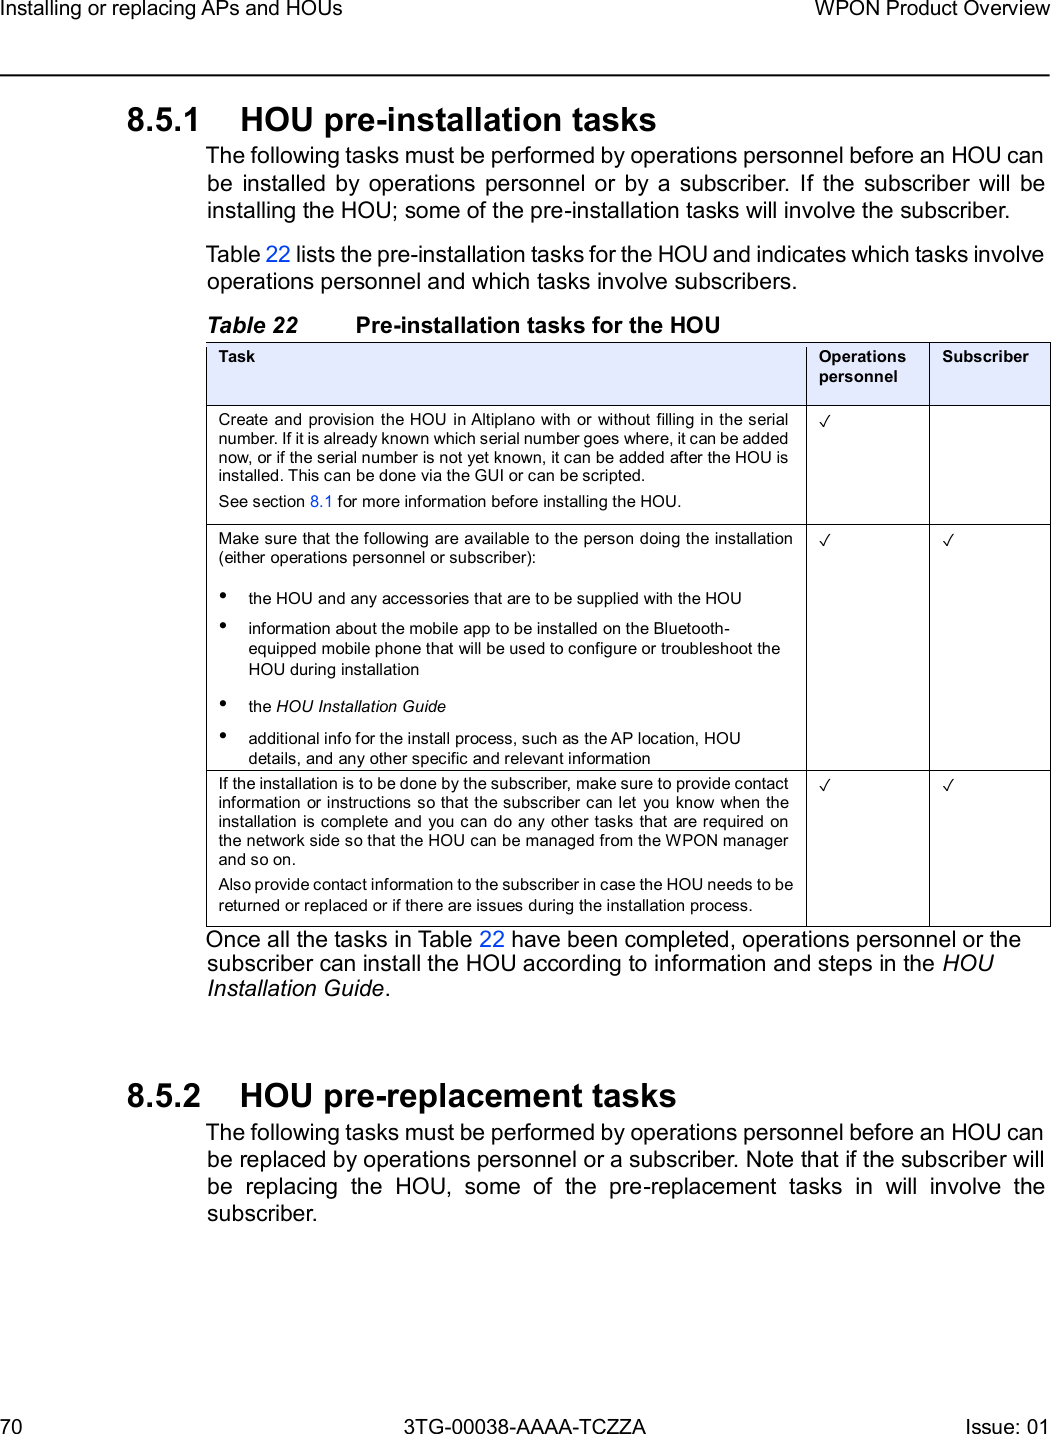 Page 70 of Nokia Bell 7577WPONAPED WPON User Manual WPON Product Overview